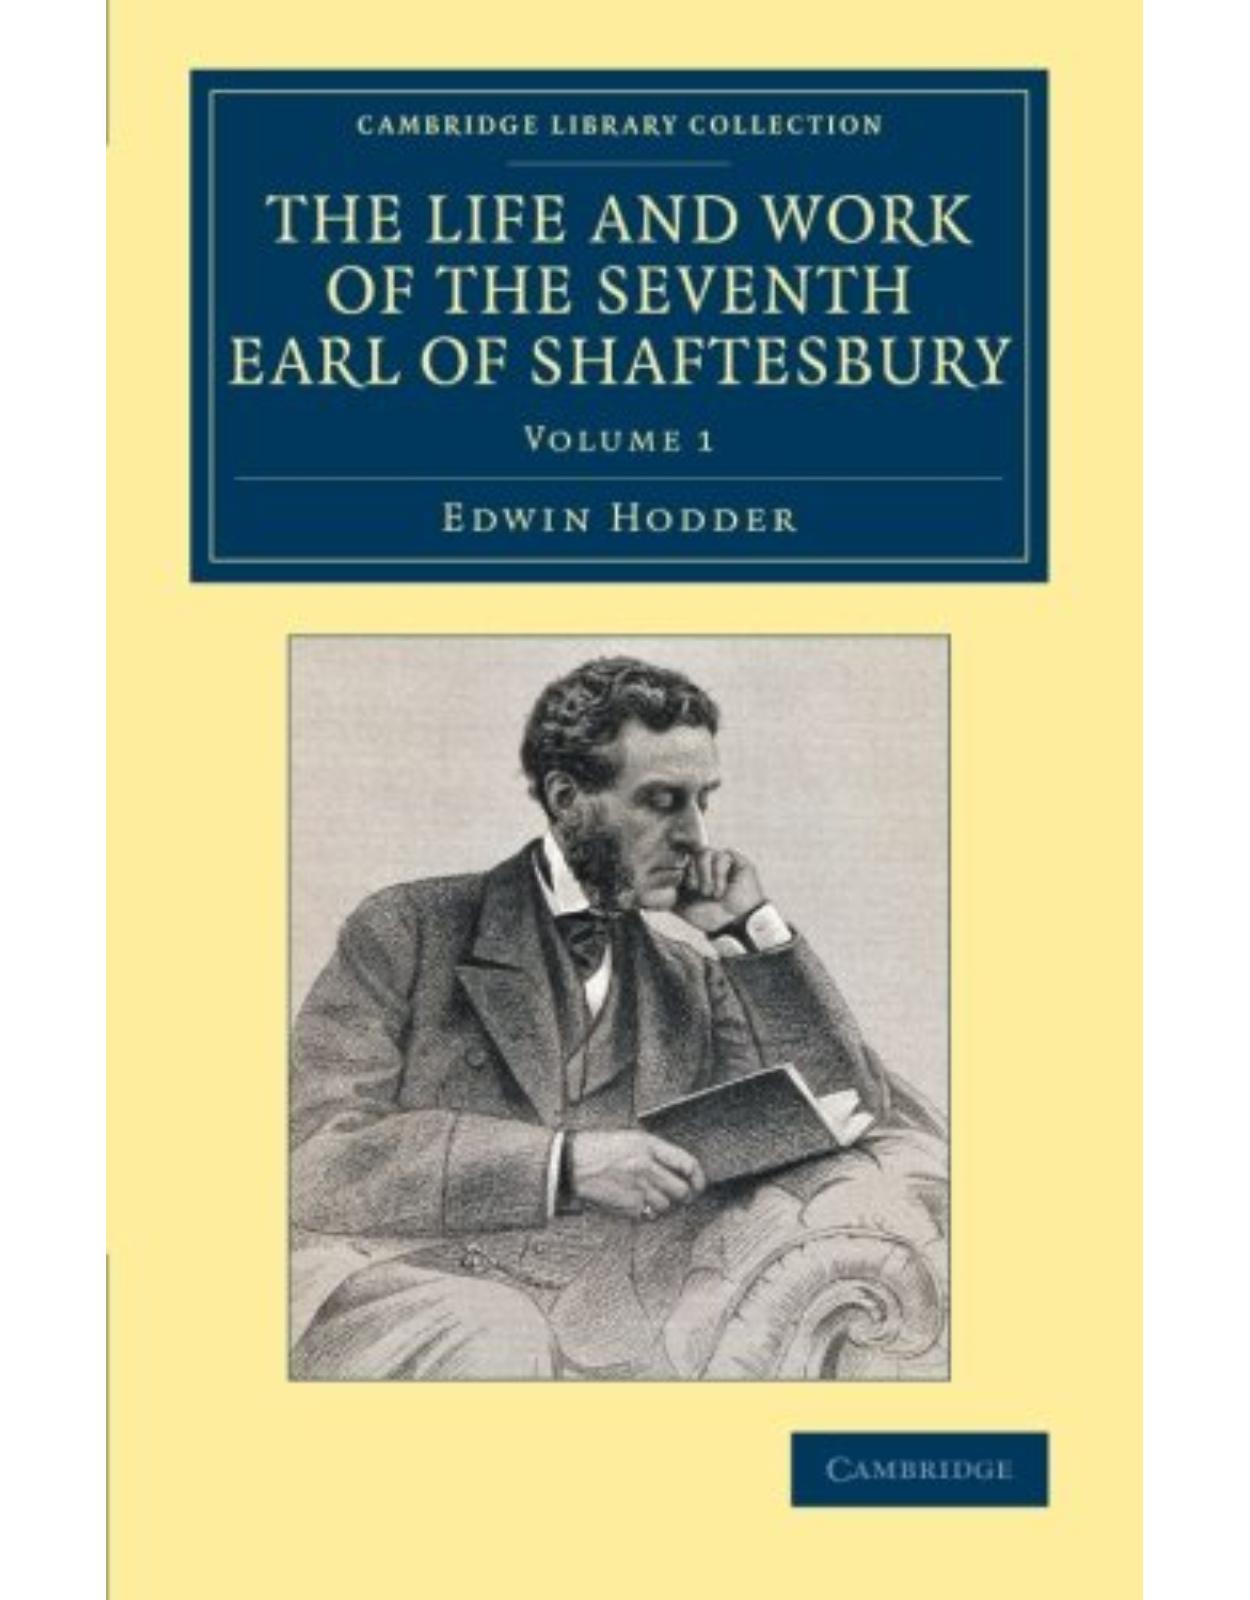 The Life and Work of the Seventh Earl of Shaftesbury, K.G. 3 Volume Set (Cambridge Library Collection - British and Irish History, 19th Century)